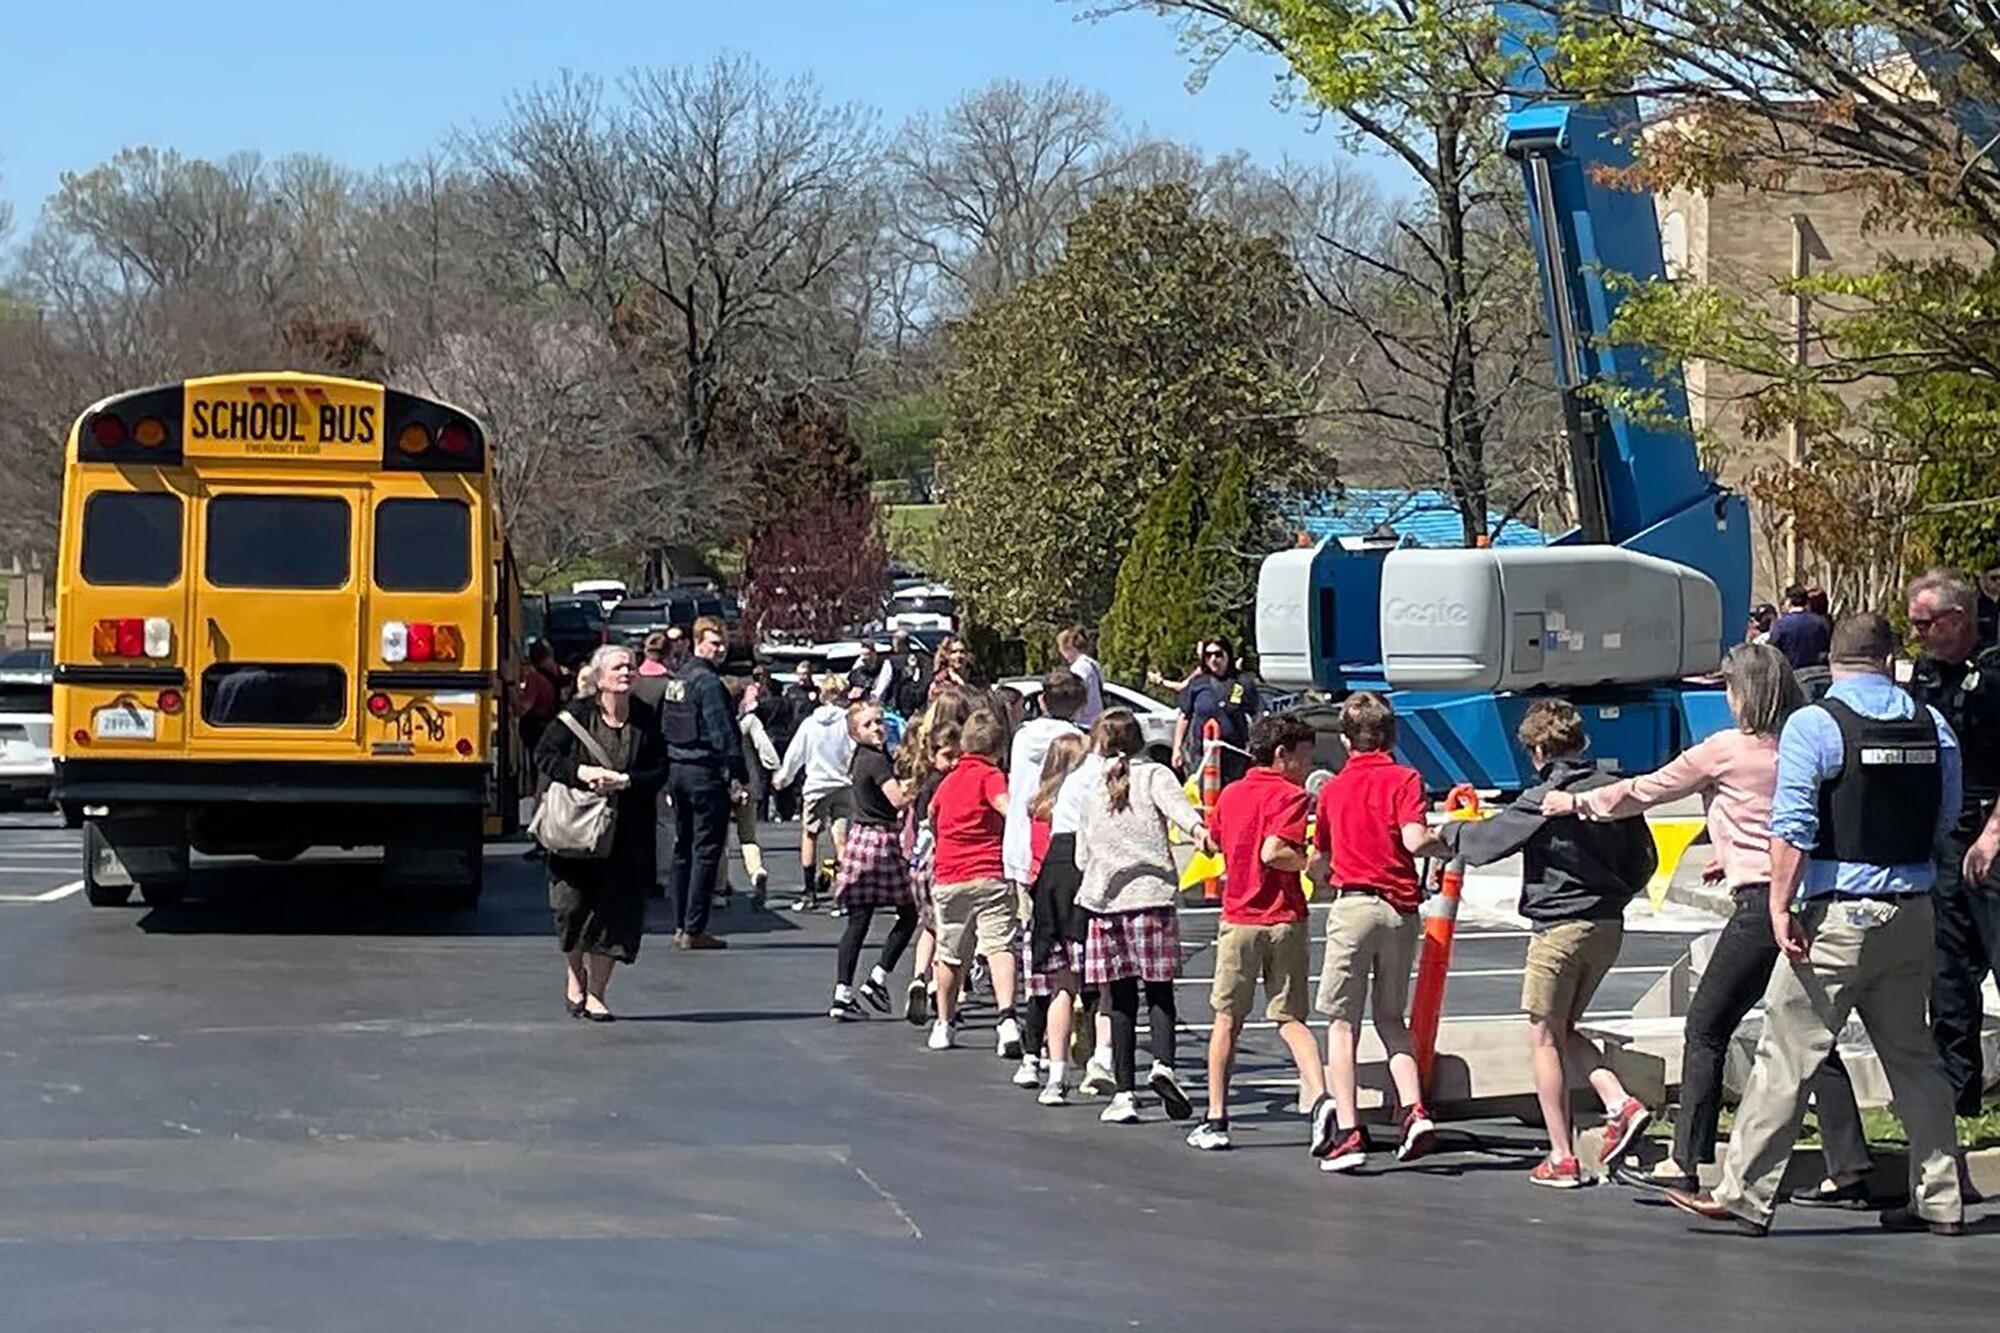 Children line up holding hands outside a school bus.